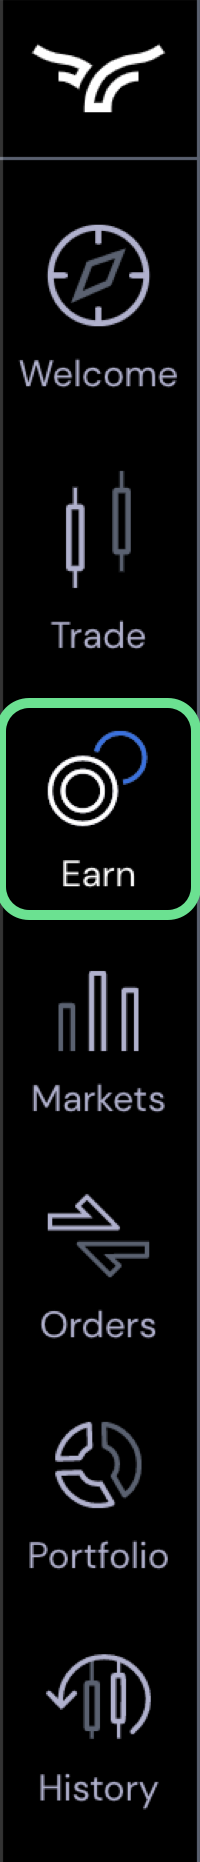 Navigation menu with earn highlighted